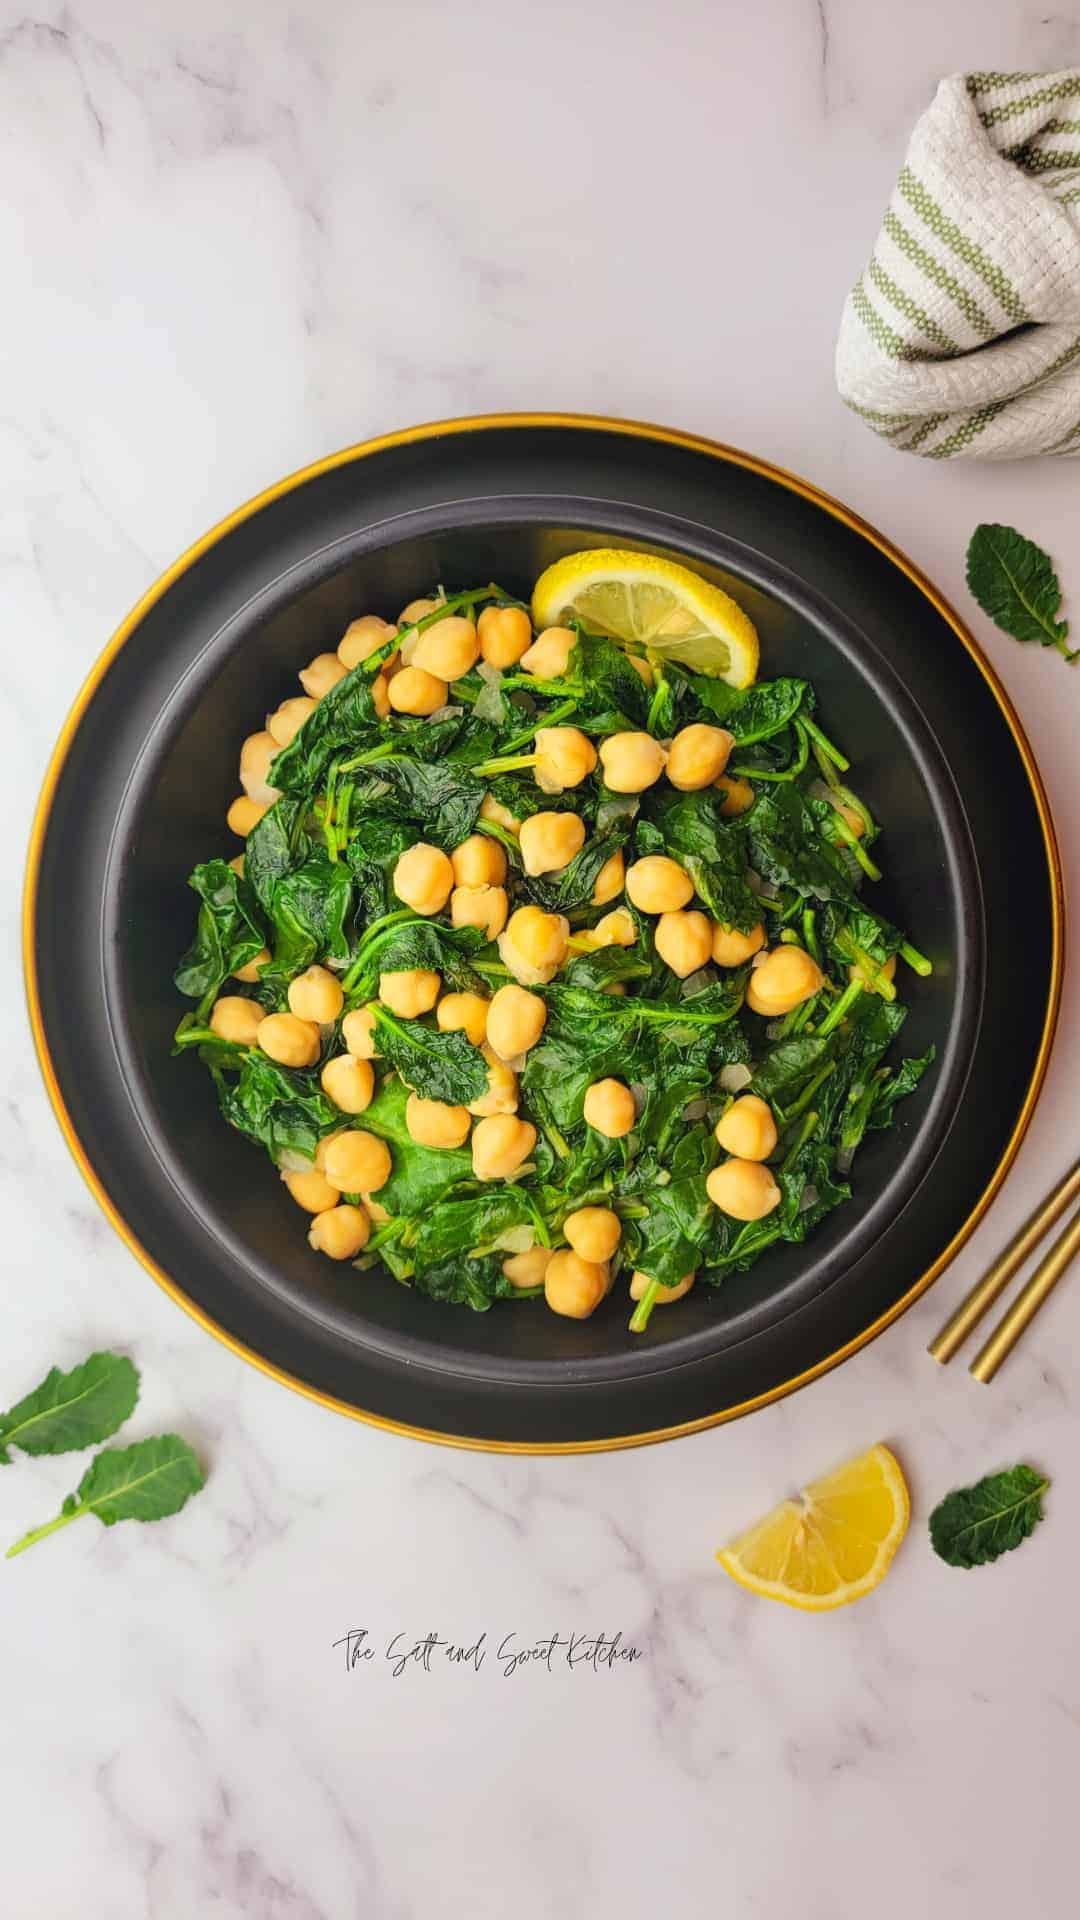 Overhead view of a warm kale salad with chickpeas placed on a black serving dish.